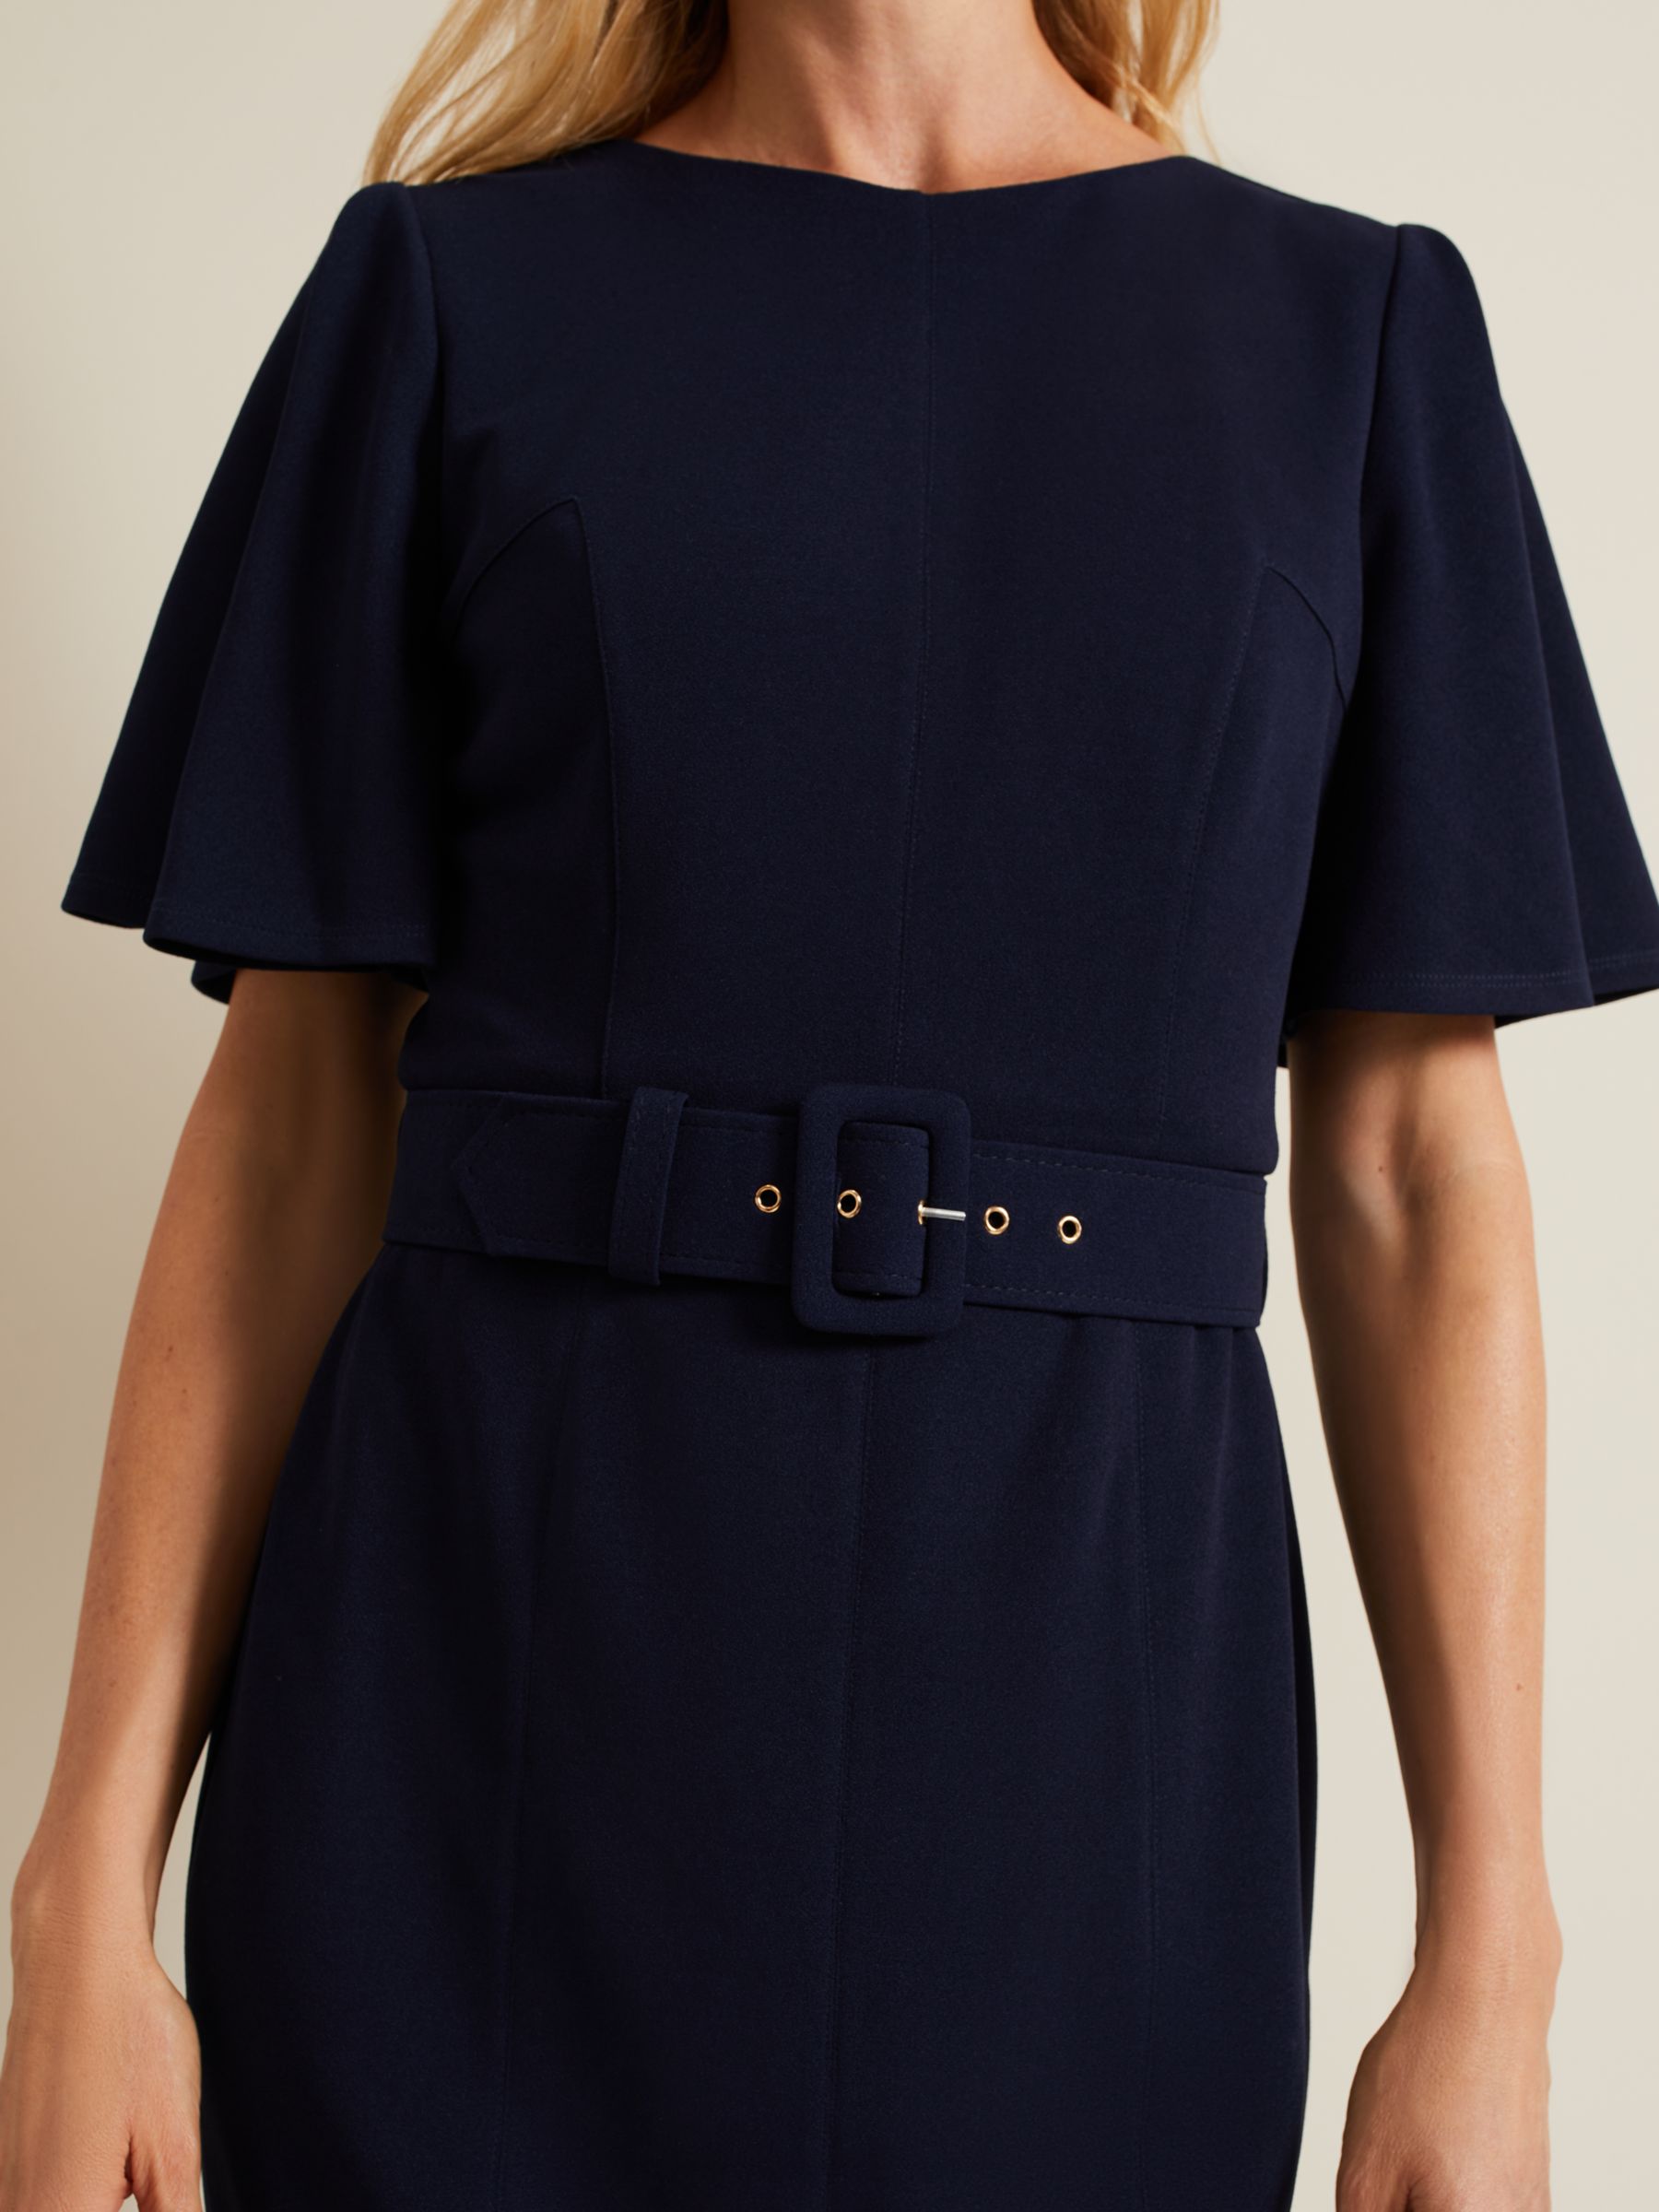 Phase Eight Fanella Belted Jersey Dress, Navy, 26